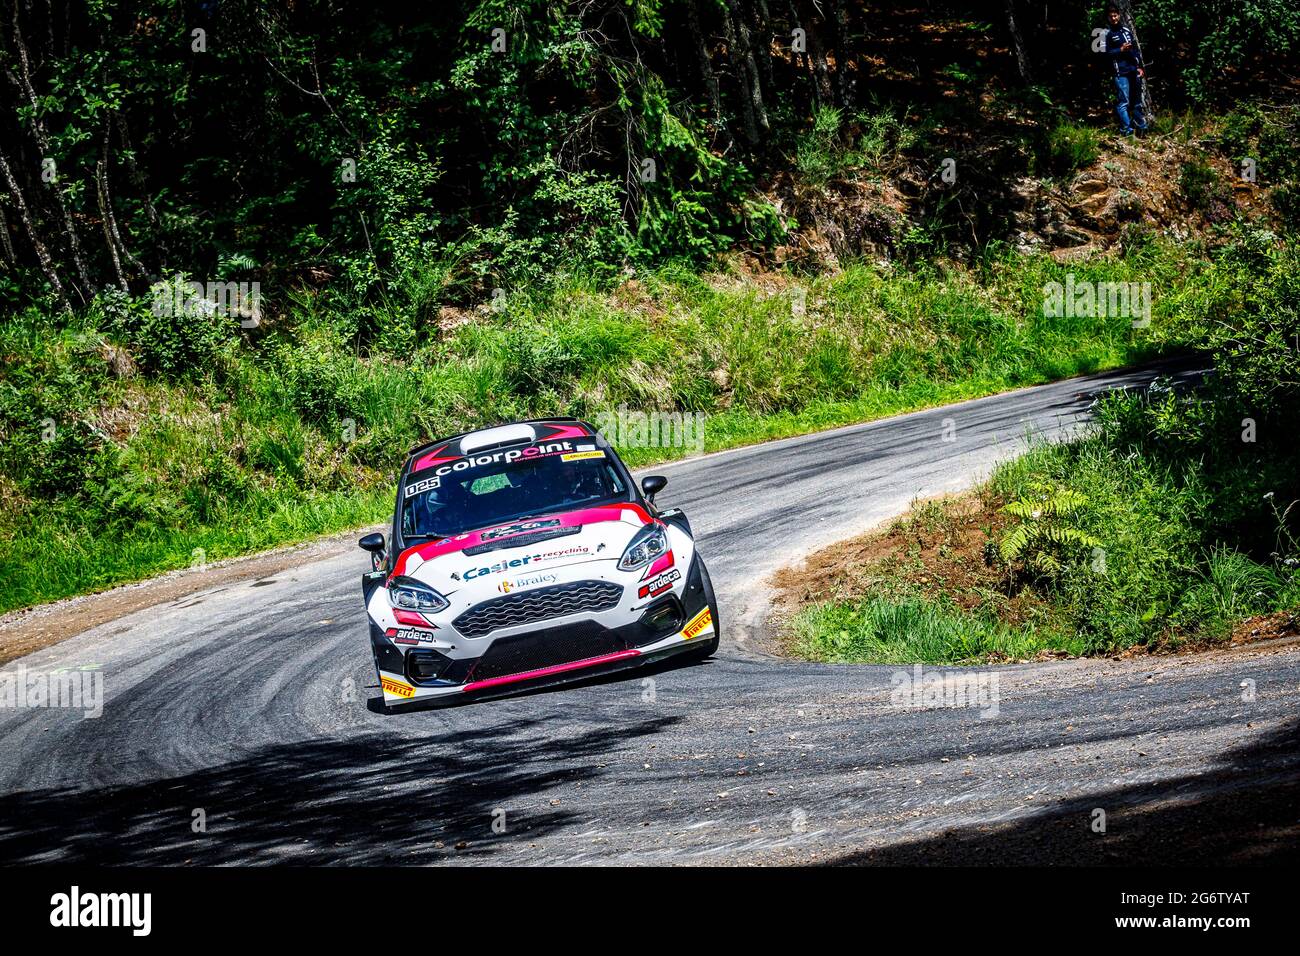 Rodez, France, 08/07/2021, 25 CASIER Bernd, VYNCKE Pieter, Ford Fiesta,  action during the Rallye Aveyron Rouergue Occitanie 2021, 3rd round of the  Championnat de France des Rallyes 2021, from Juillet 8 to